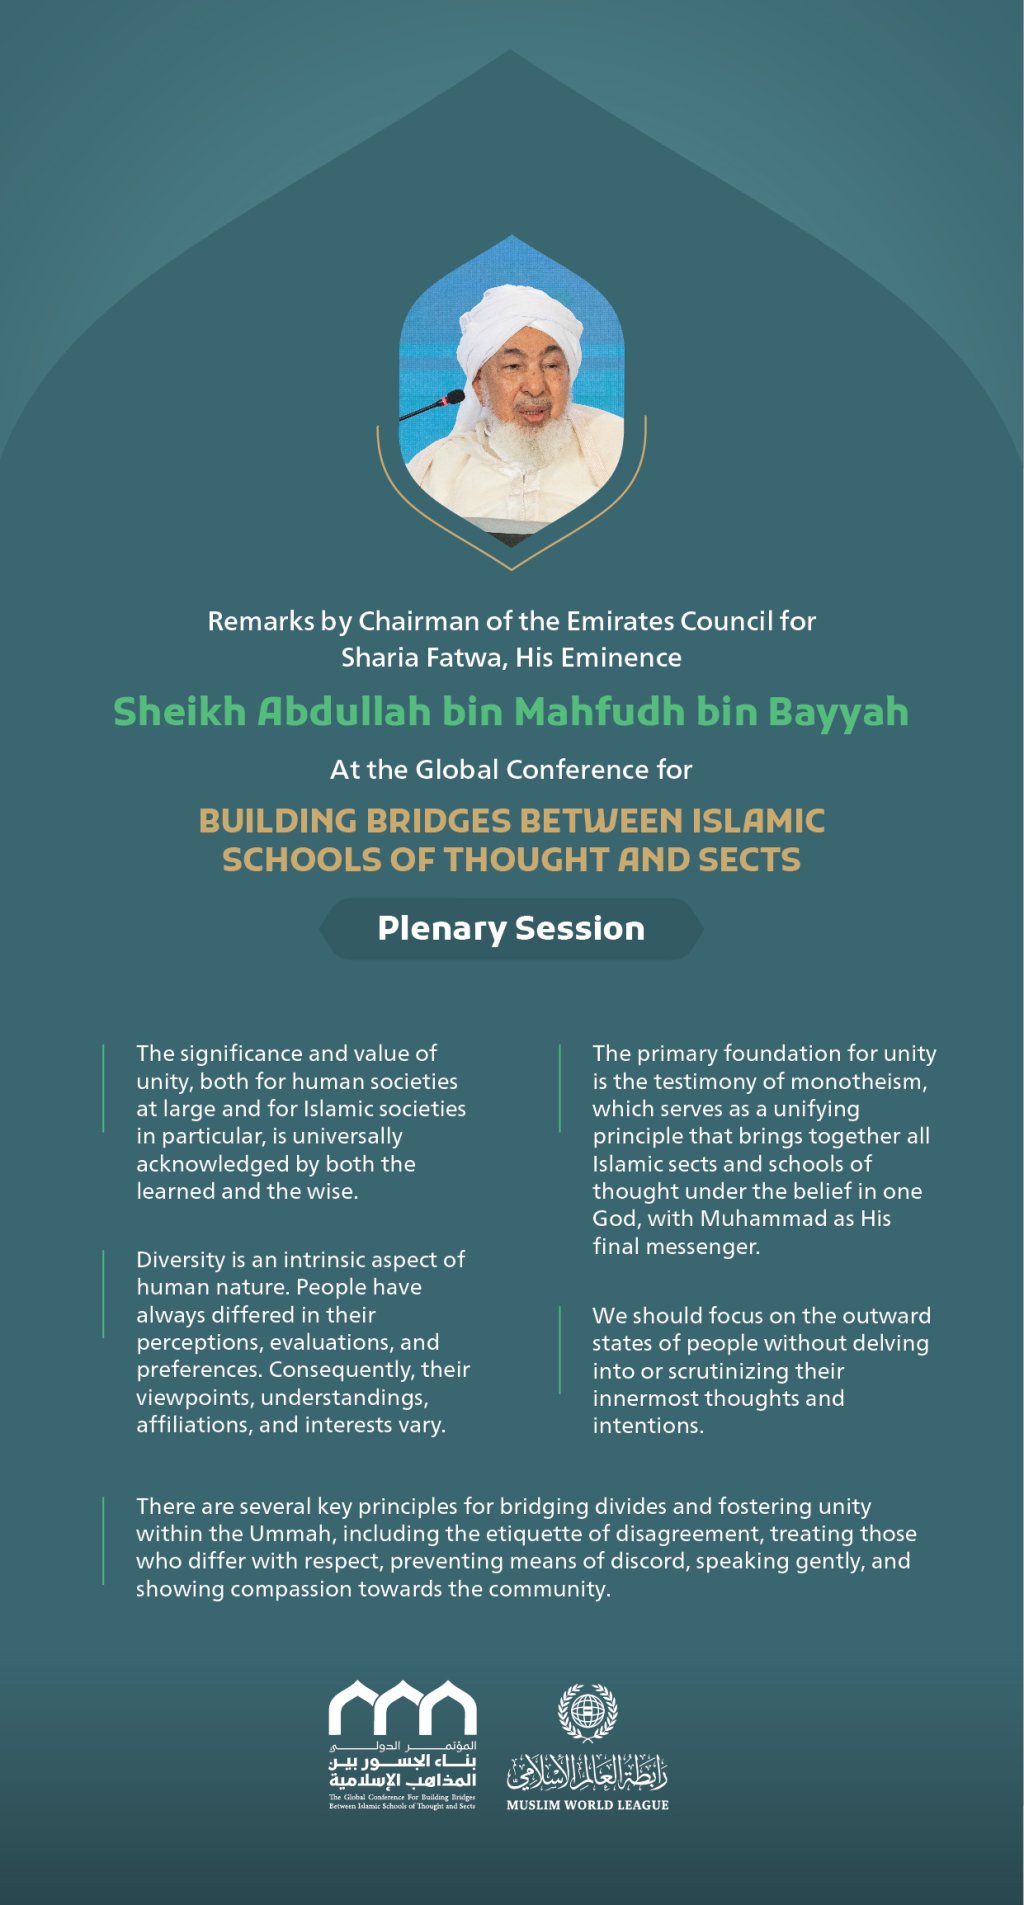 Remarks by His Eminence Sheikh Abdullah bin ‎Mahfudh bin Bayyah, Chairman of the Emirates Council for Sharia ‎Fatwa at the Global Conference for Building Bridges between Islamic Schools of Thought and Sects.